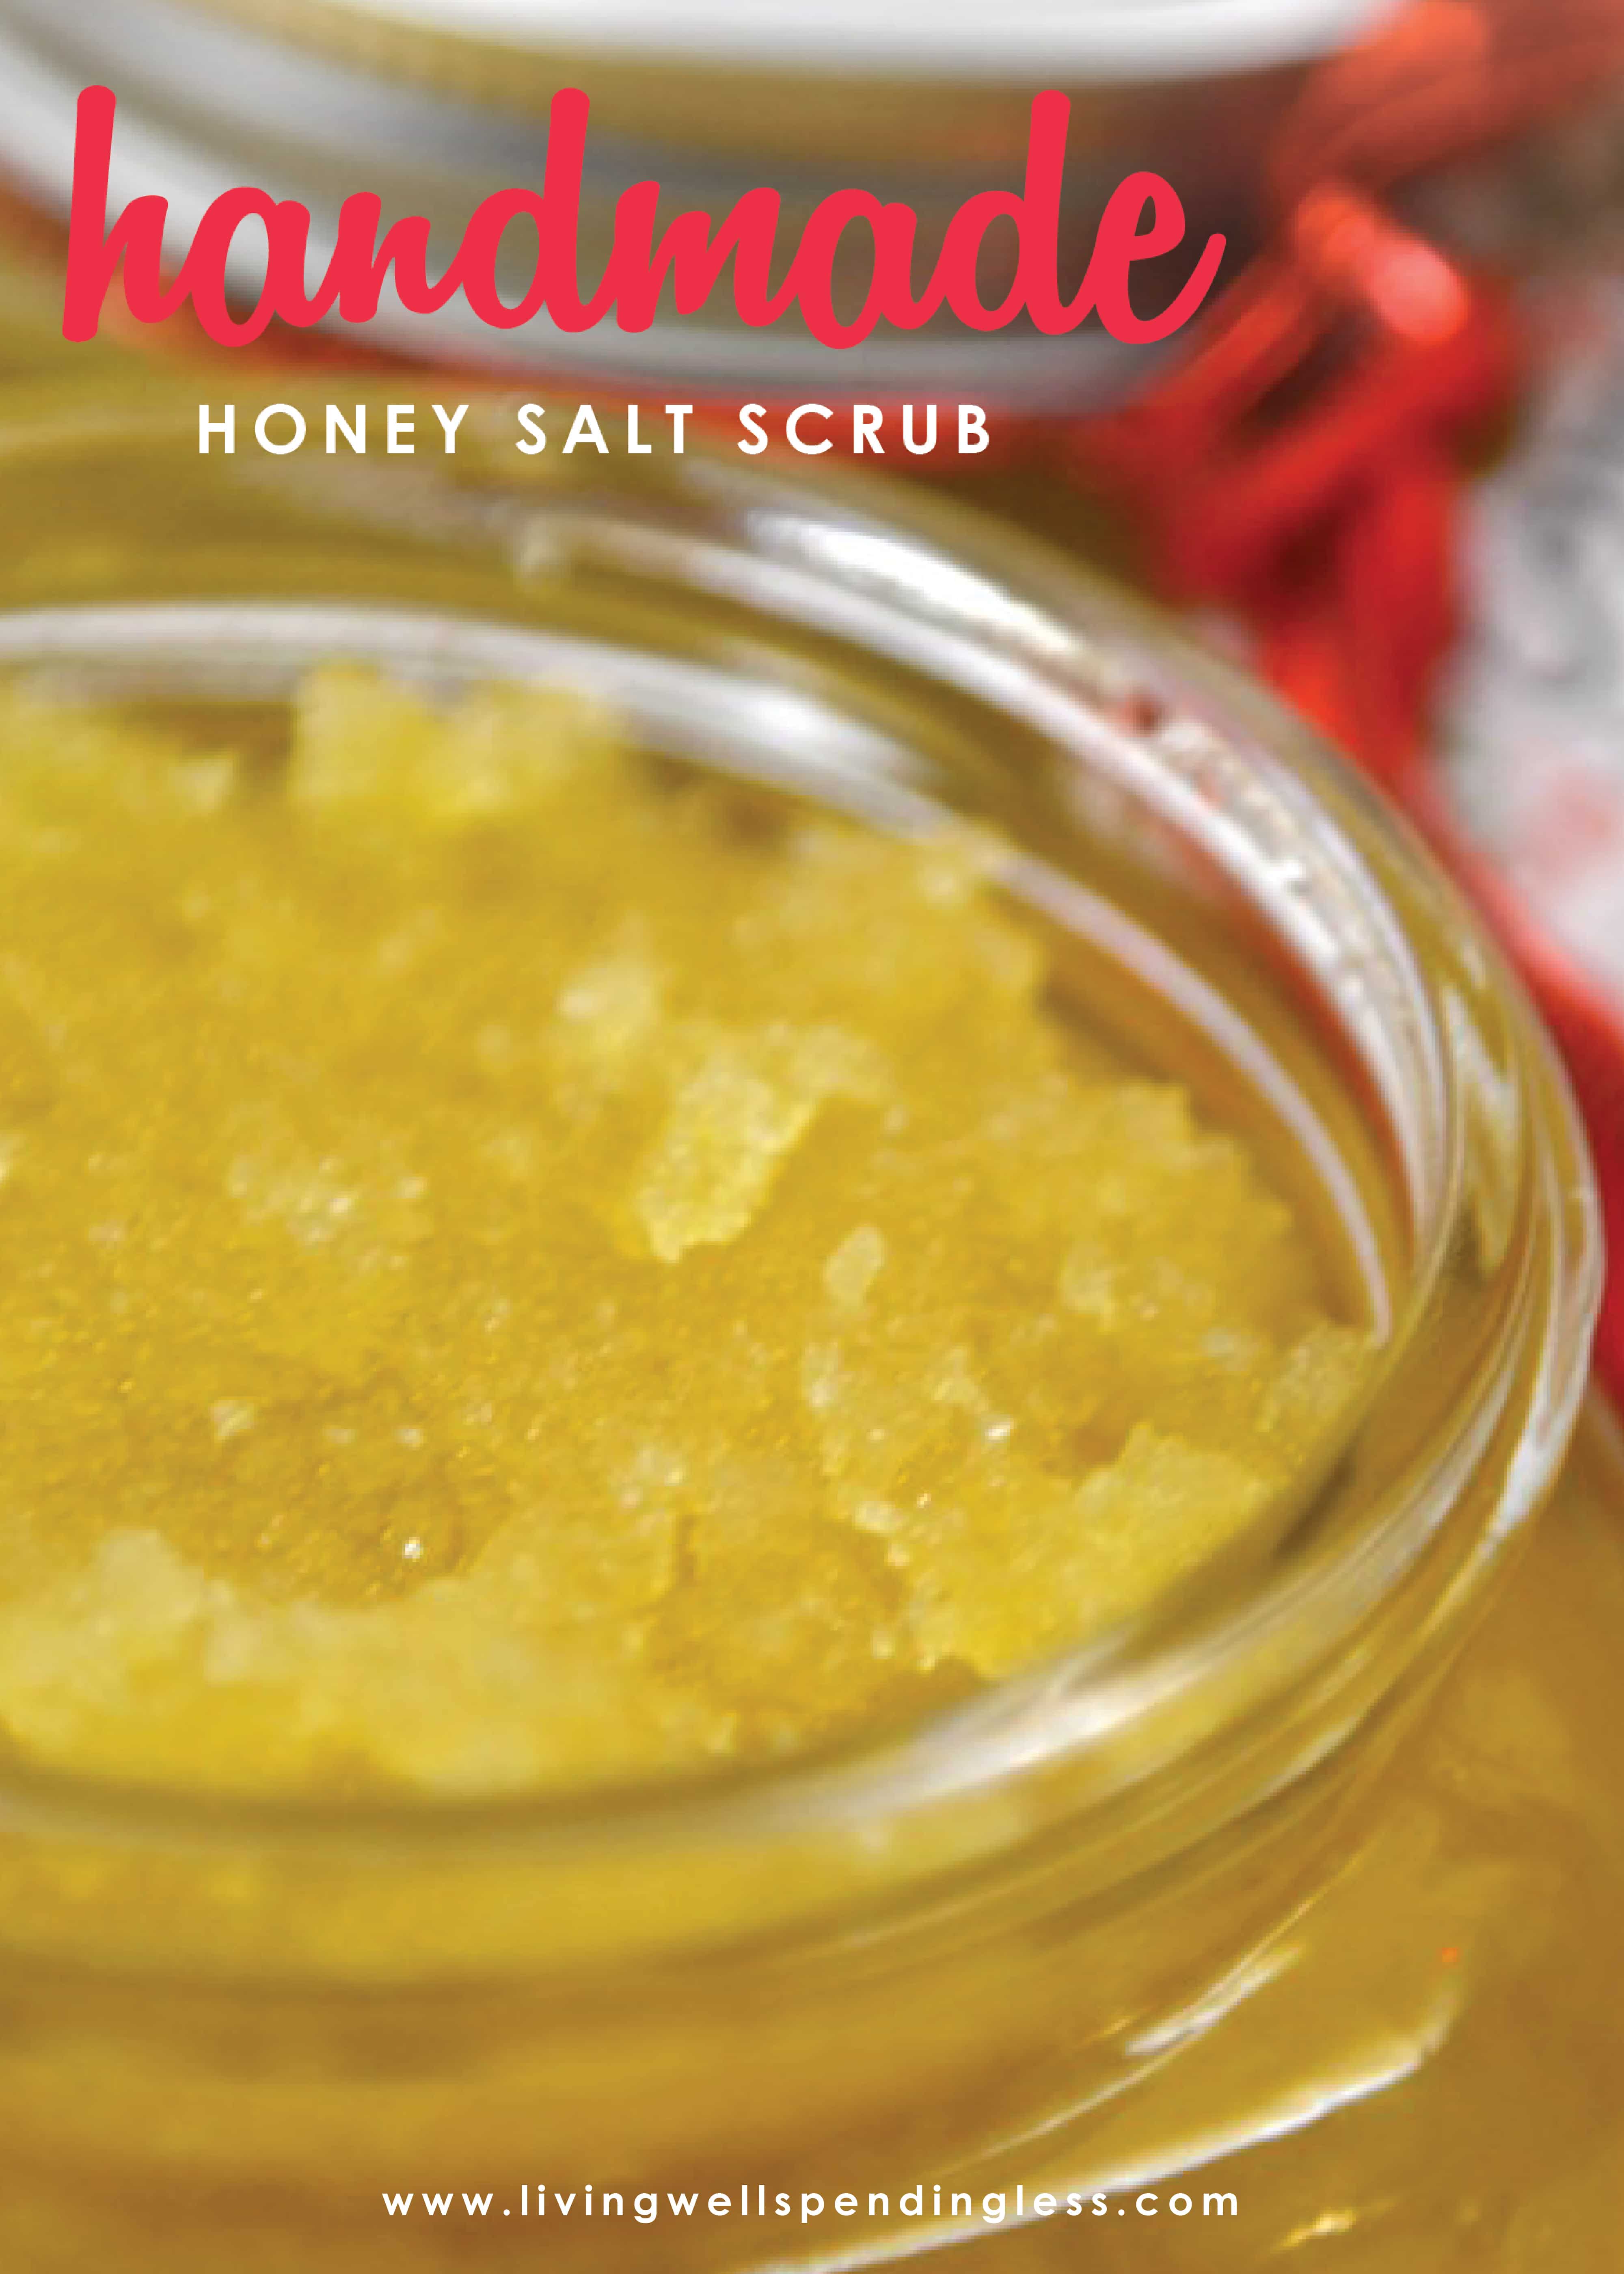 This easy honey salt scrub is not only the perfect solution to dry, flaky skin, but costs far less than expensive store-bought scrubs!